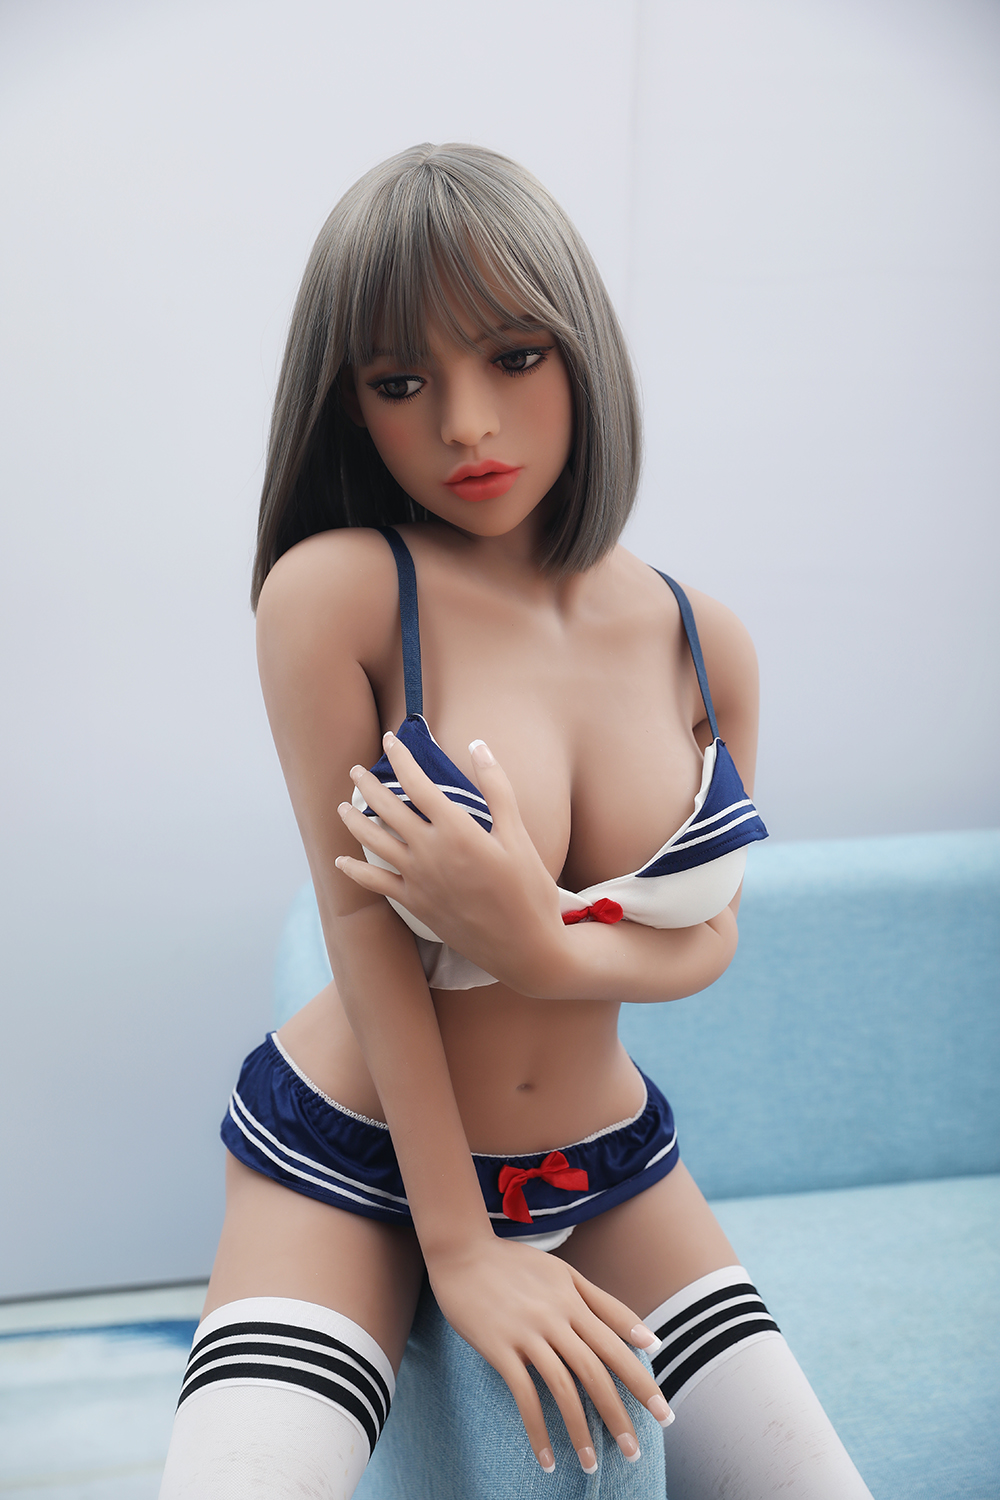 Jarliet 4ft 11 /151cm Lovely Realistic Sex Doll - Emma-SexDollBabe